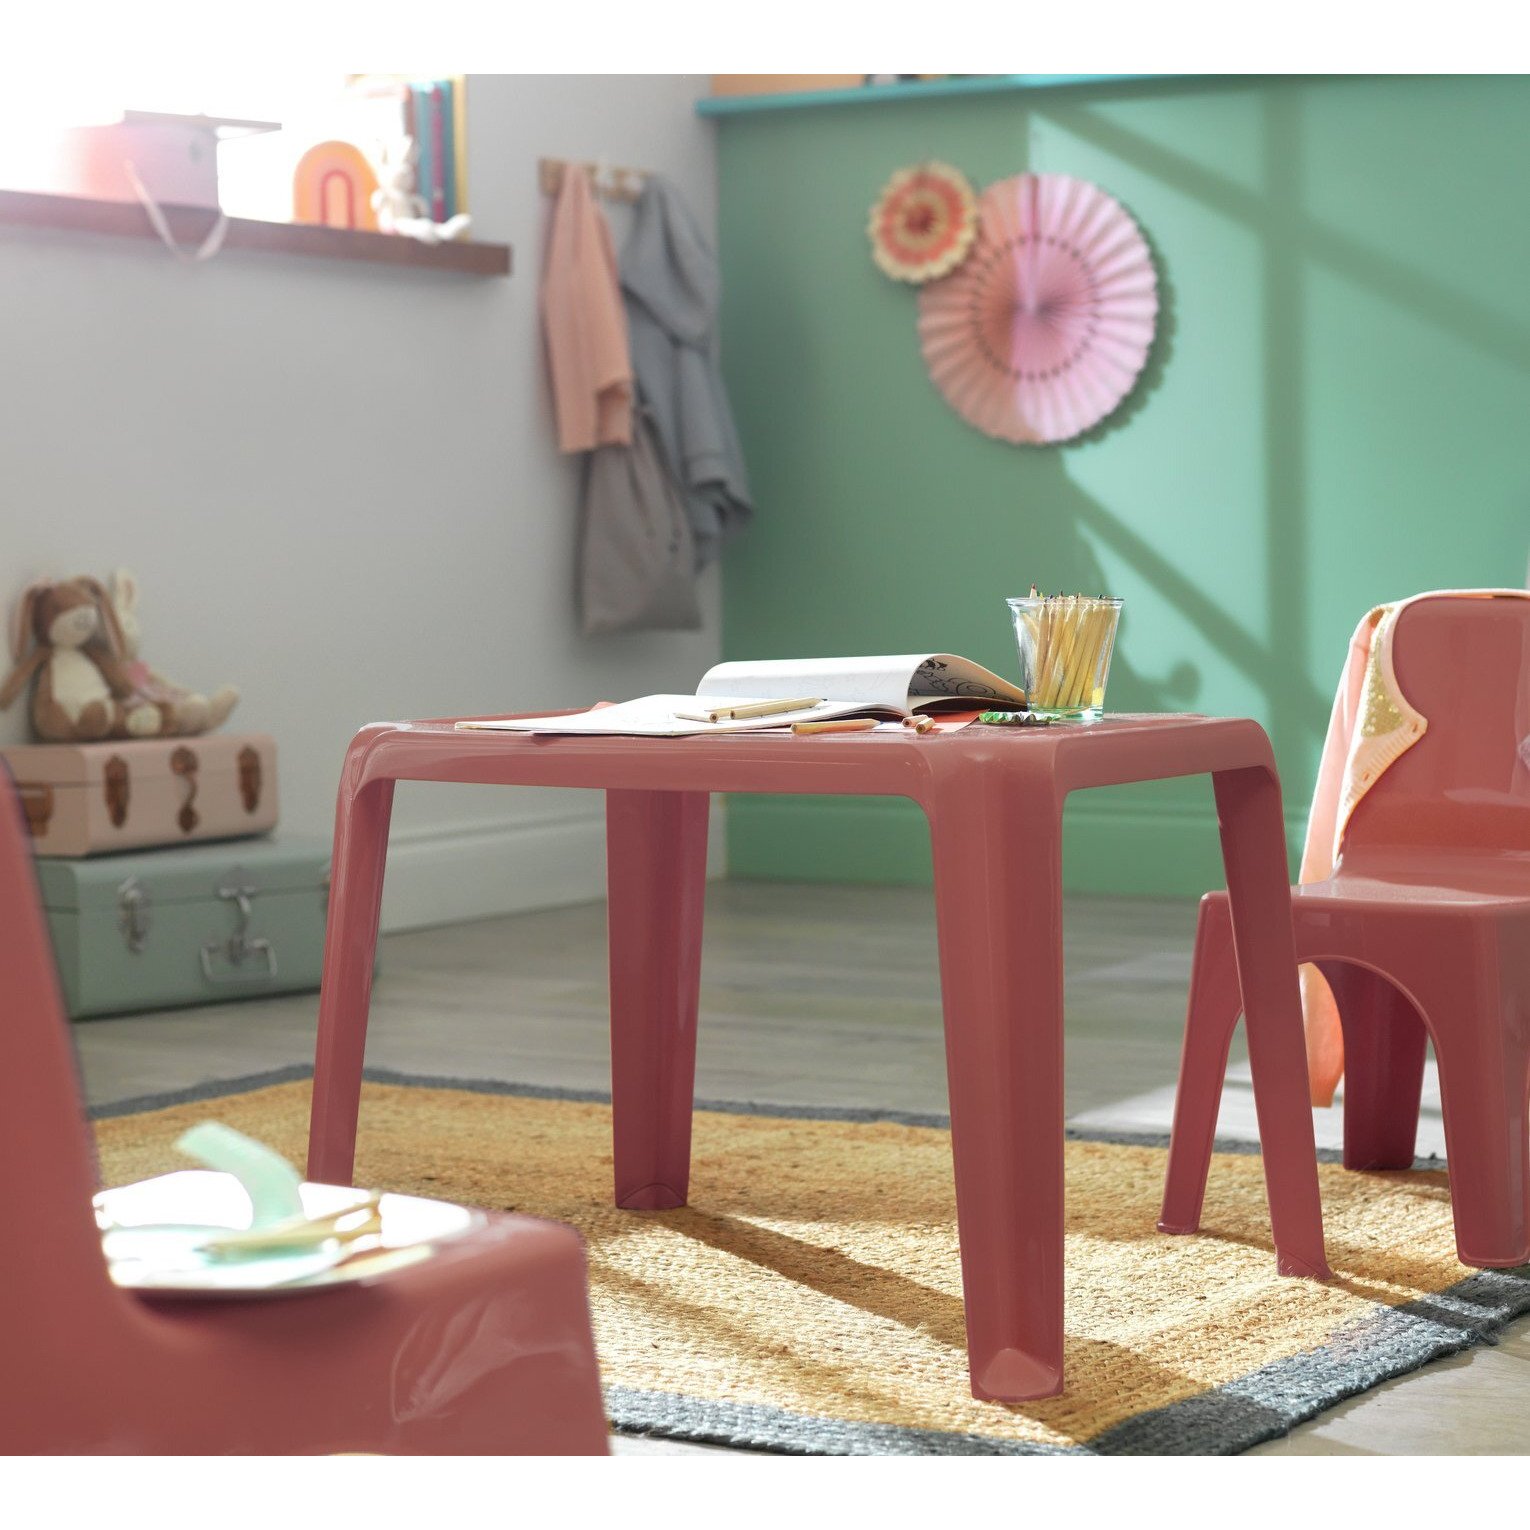 Bica Kids Plastic Table - Red - image 1